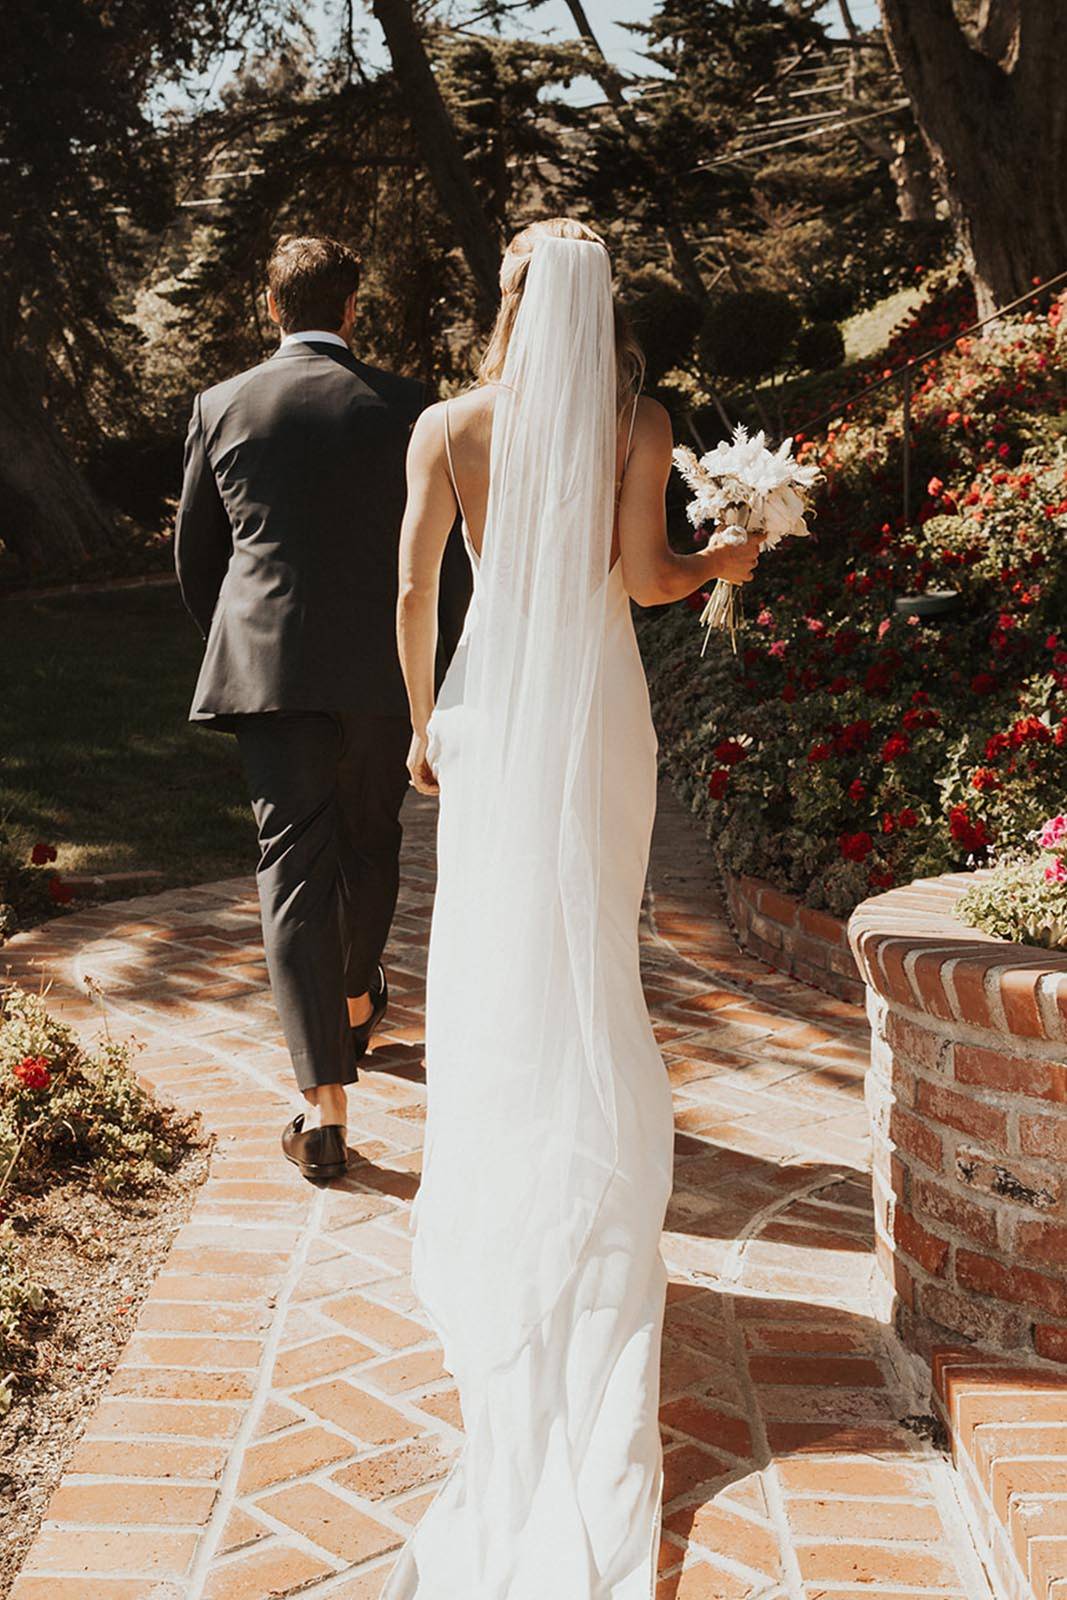 The Mandala Veil on bride wearing the Summer gown